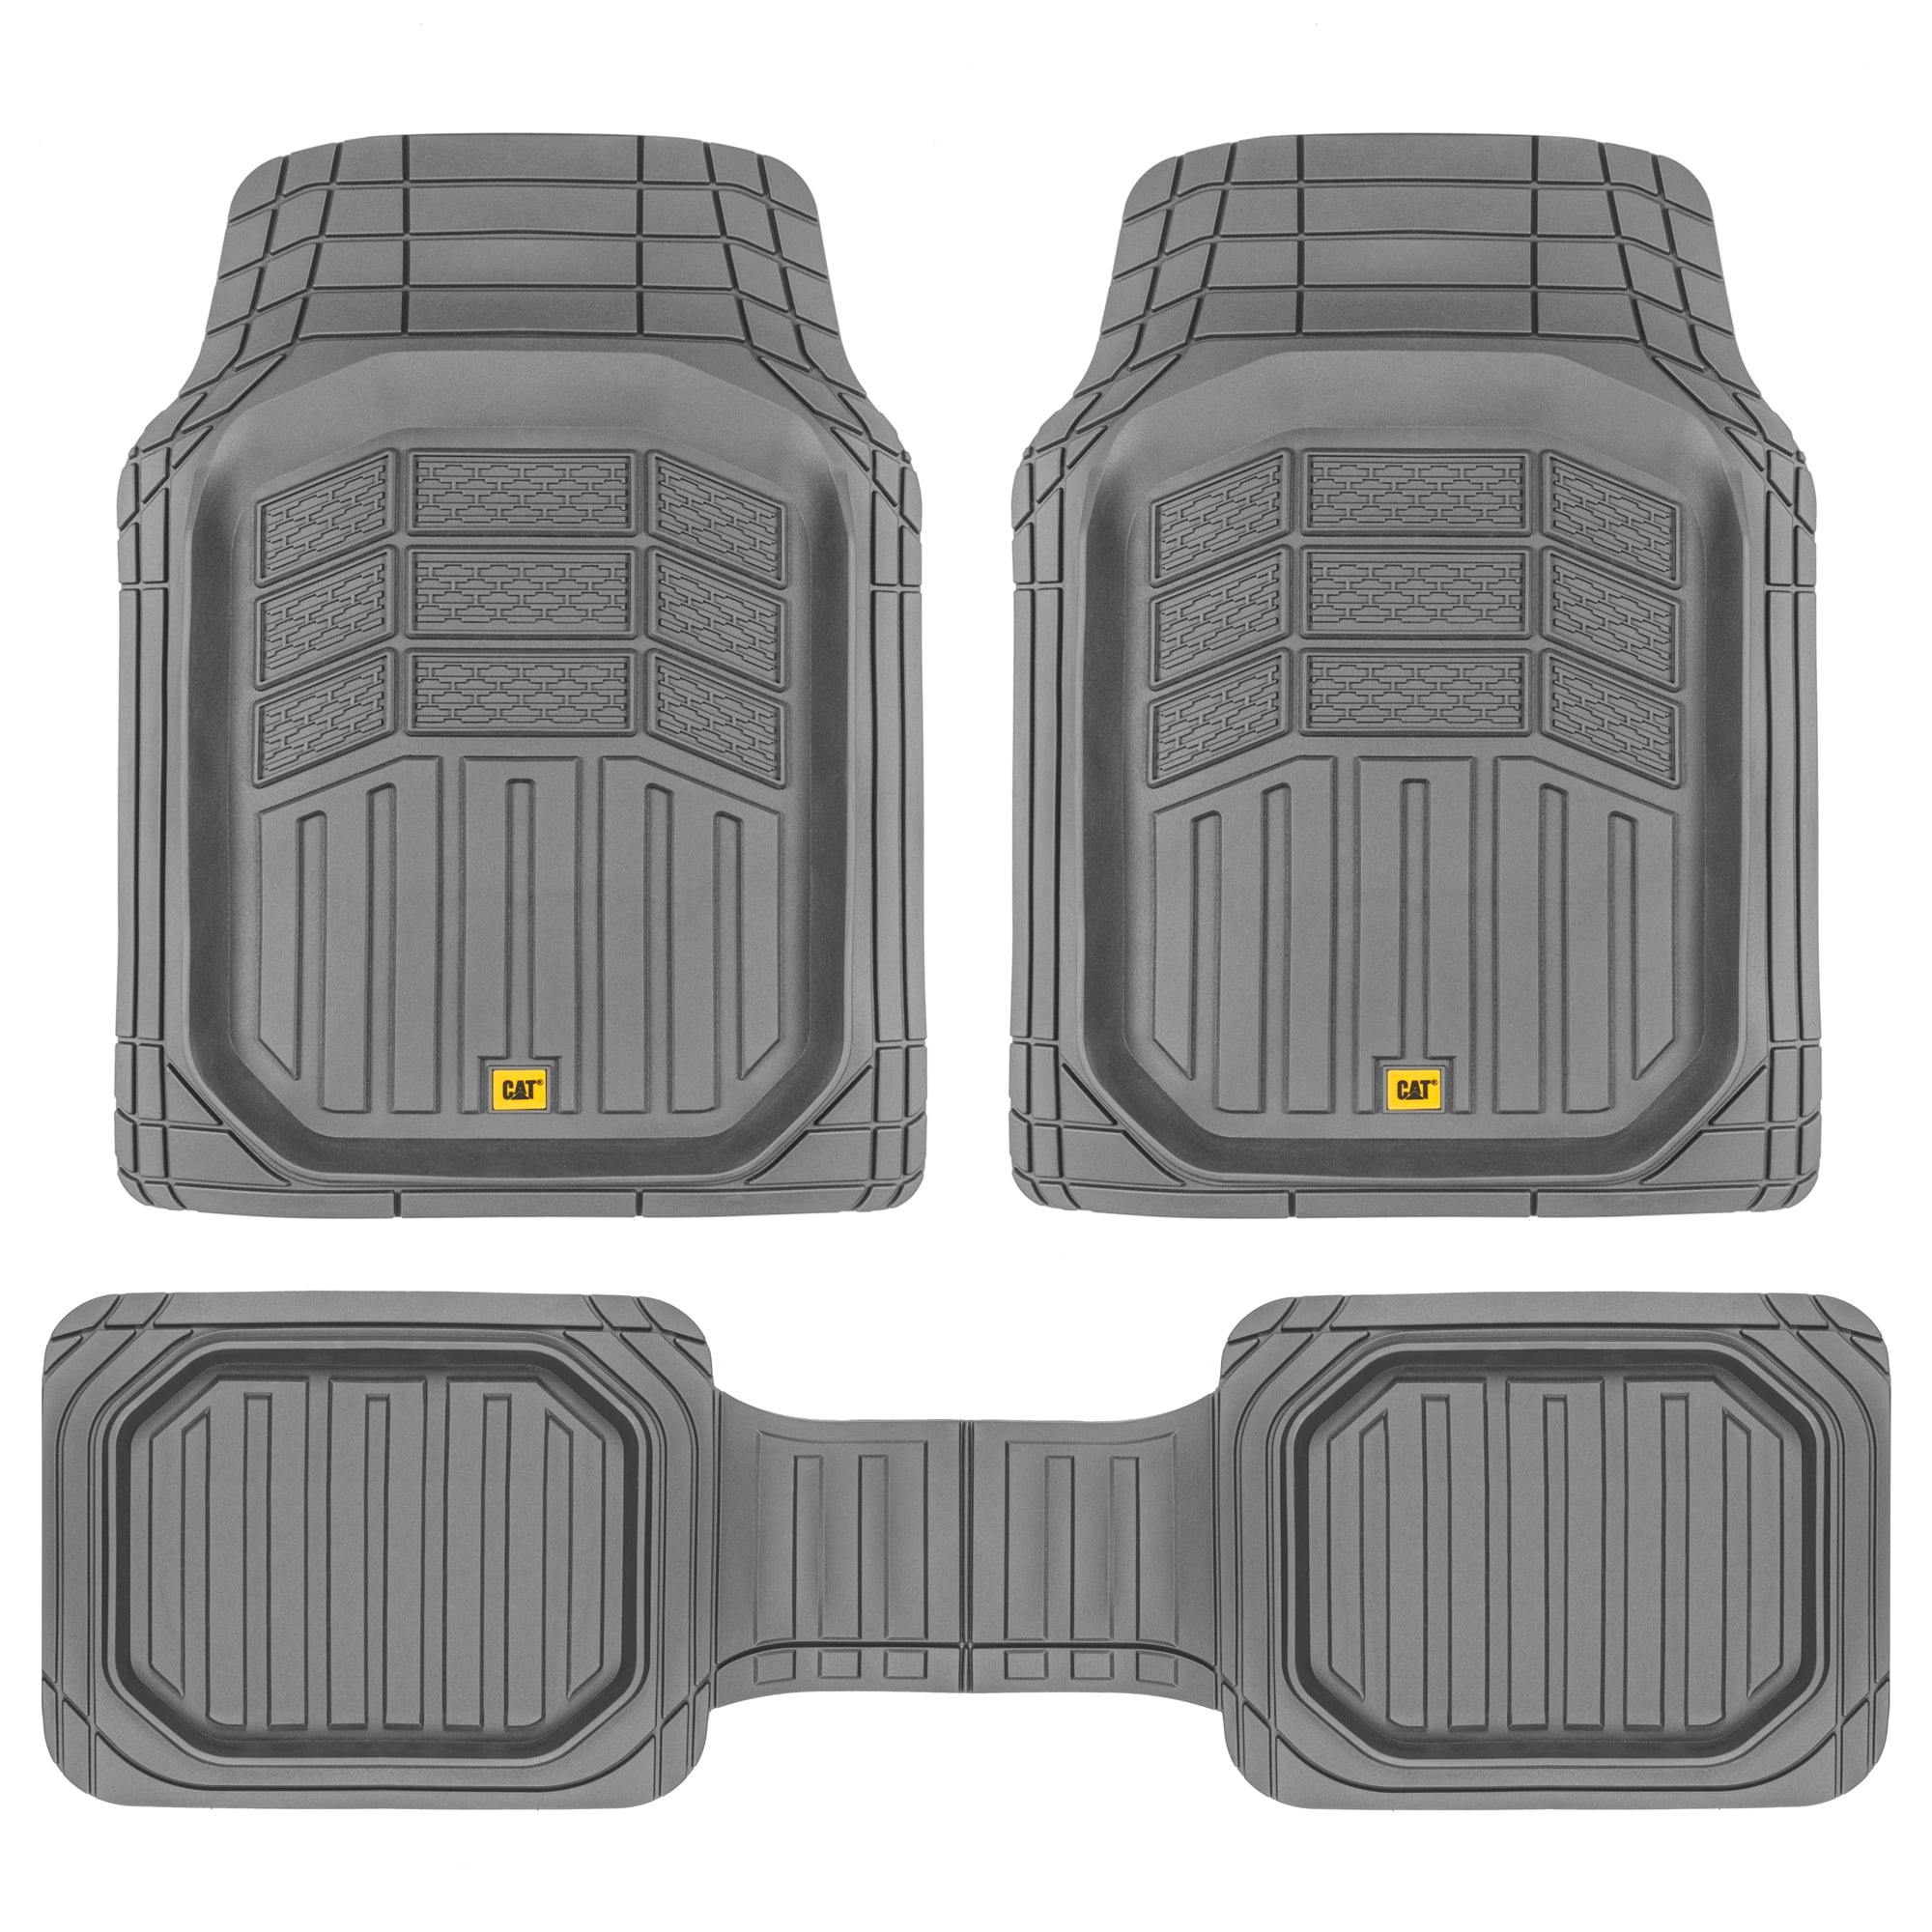 Black Caterpillar Deep Dish Rubber Floor Mats All Weather for Car Truck SUV & Van Total Protection Durable Trim to Fit Liners Heavy Duty Odorless Model Number CAMT-1004-BK